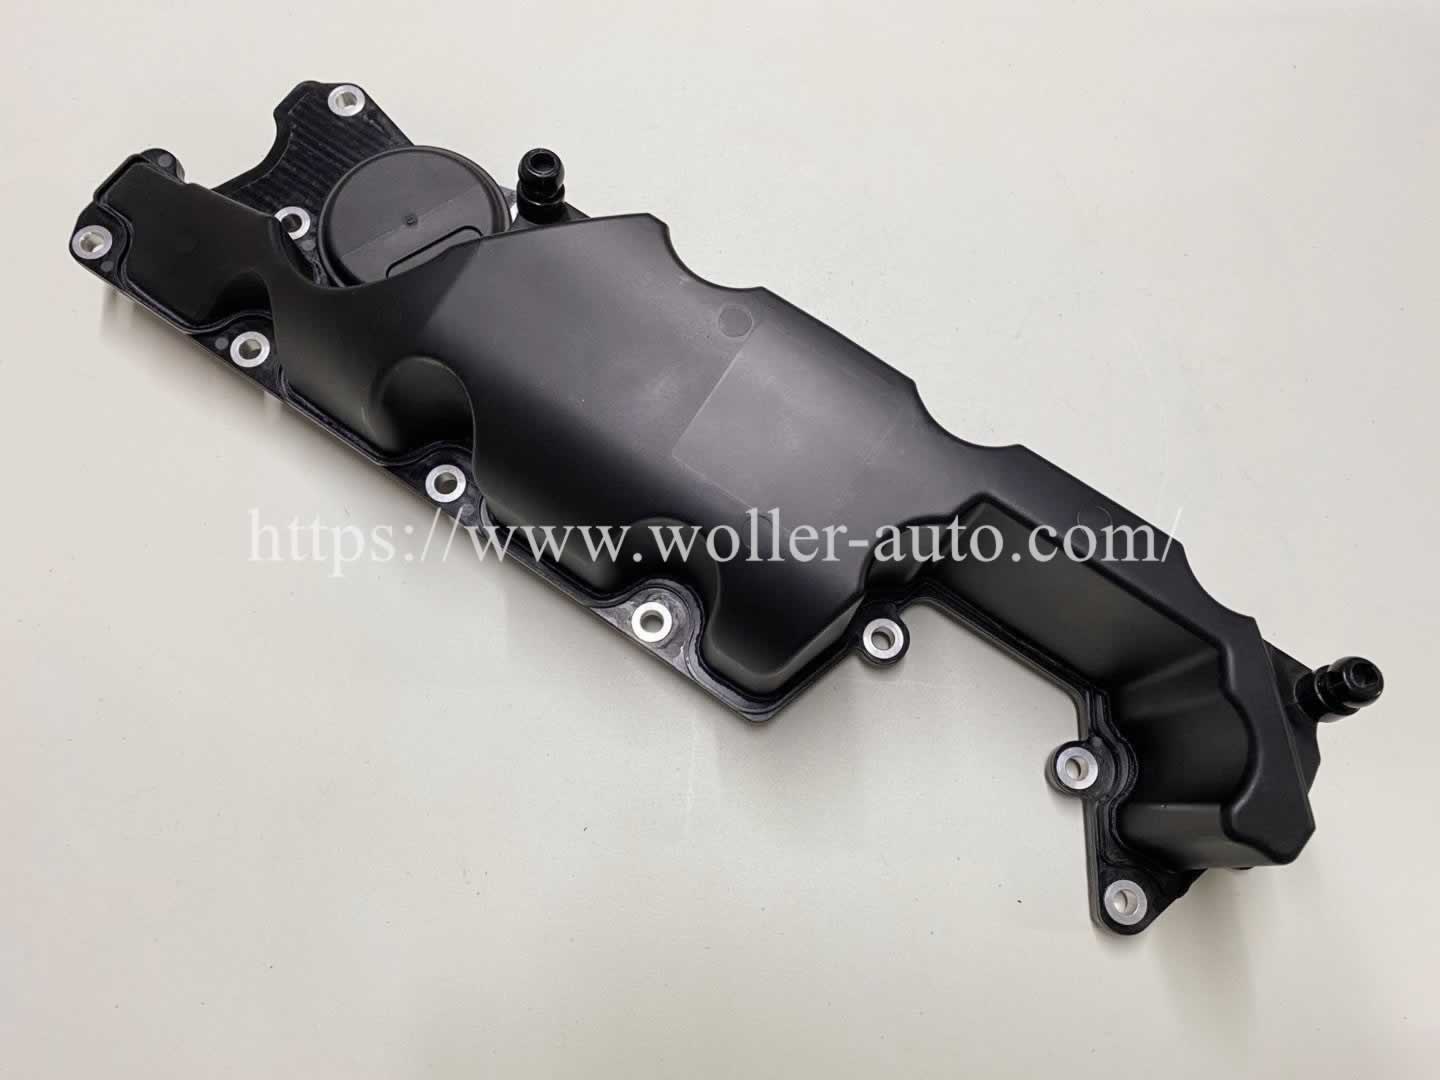 Engine Valve Cover OE 30757662 30731234 30788481 31319642 For Volvo XC60 XC70 XC90 S80 V70 3.2L